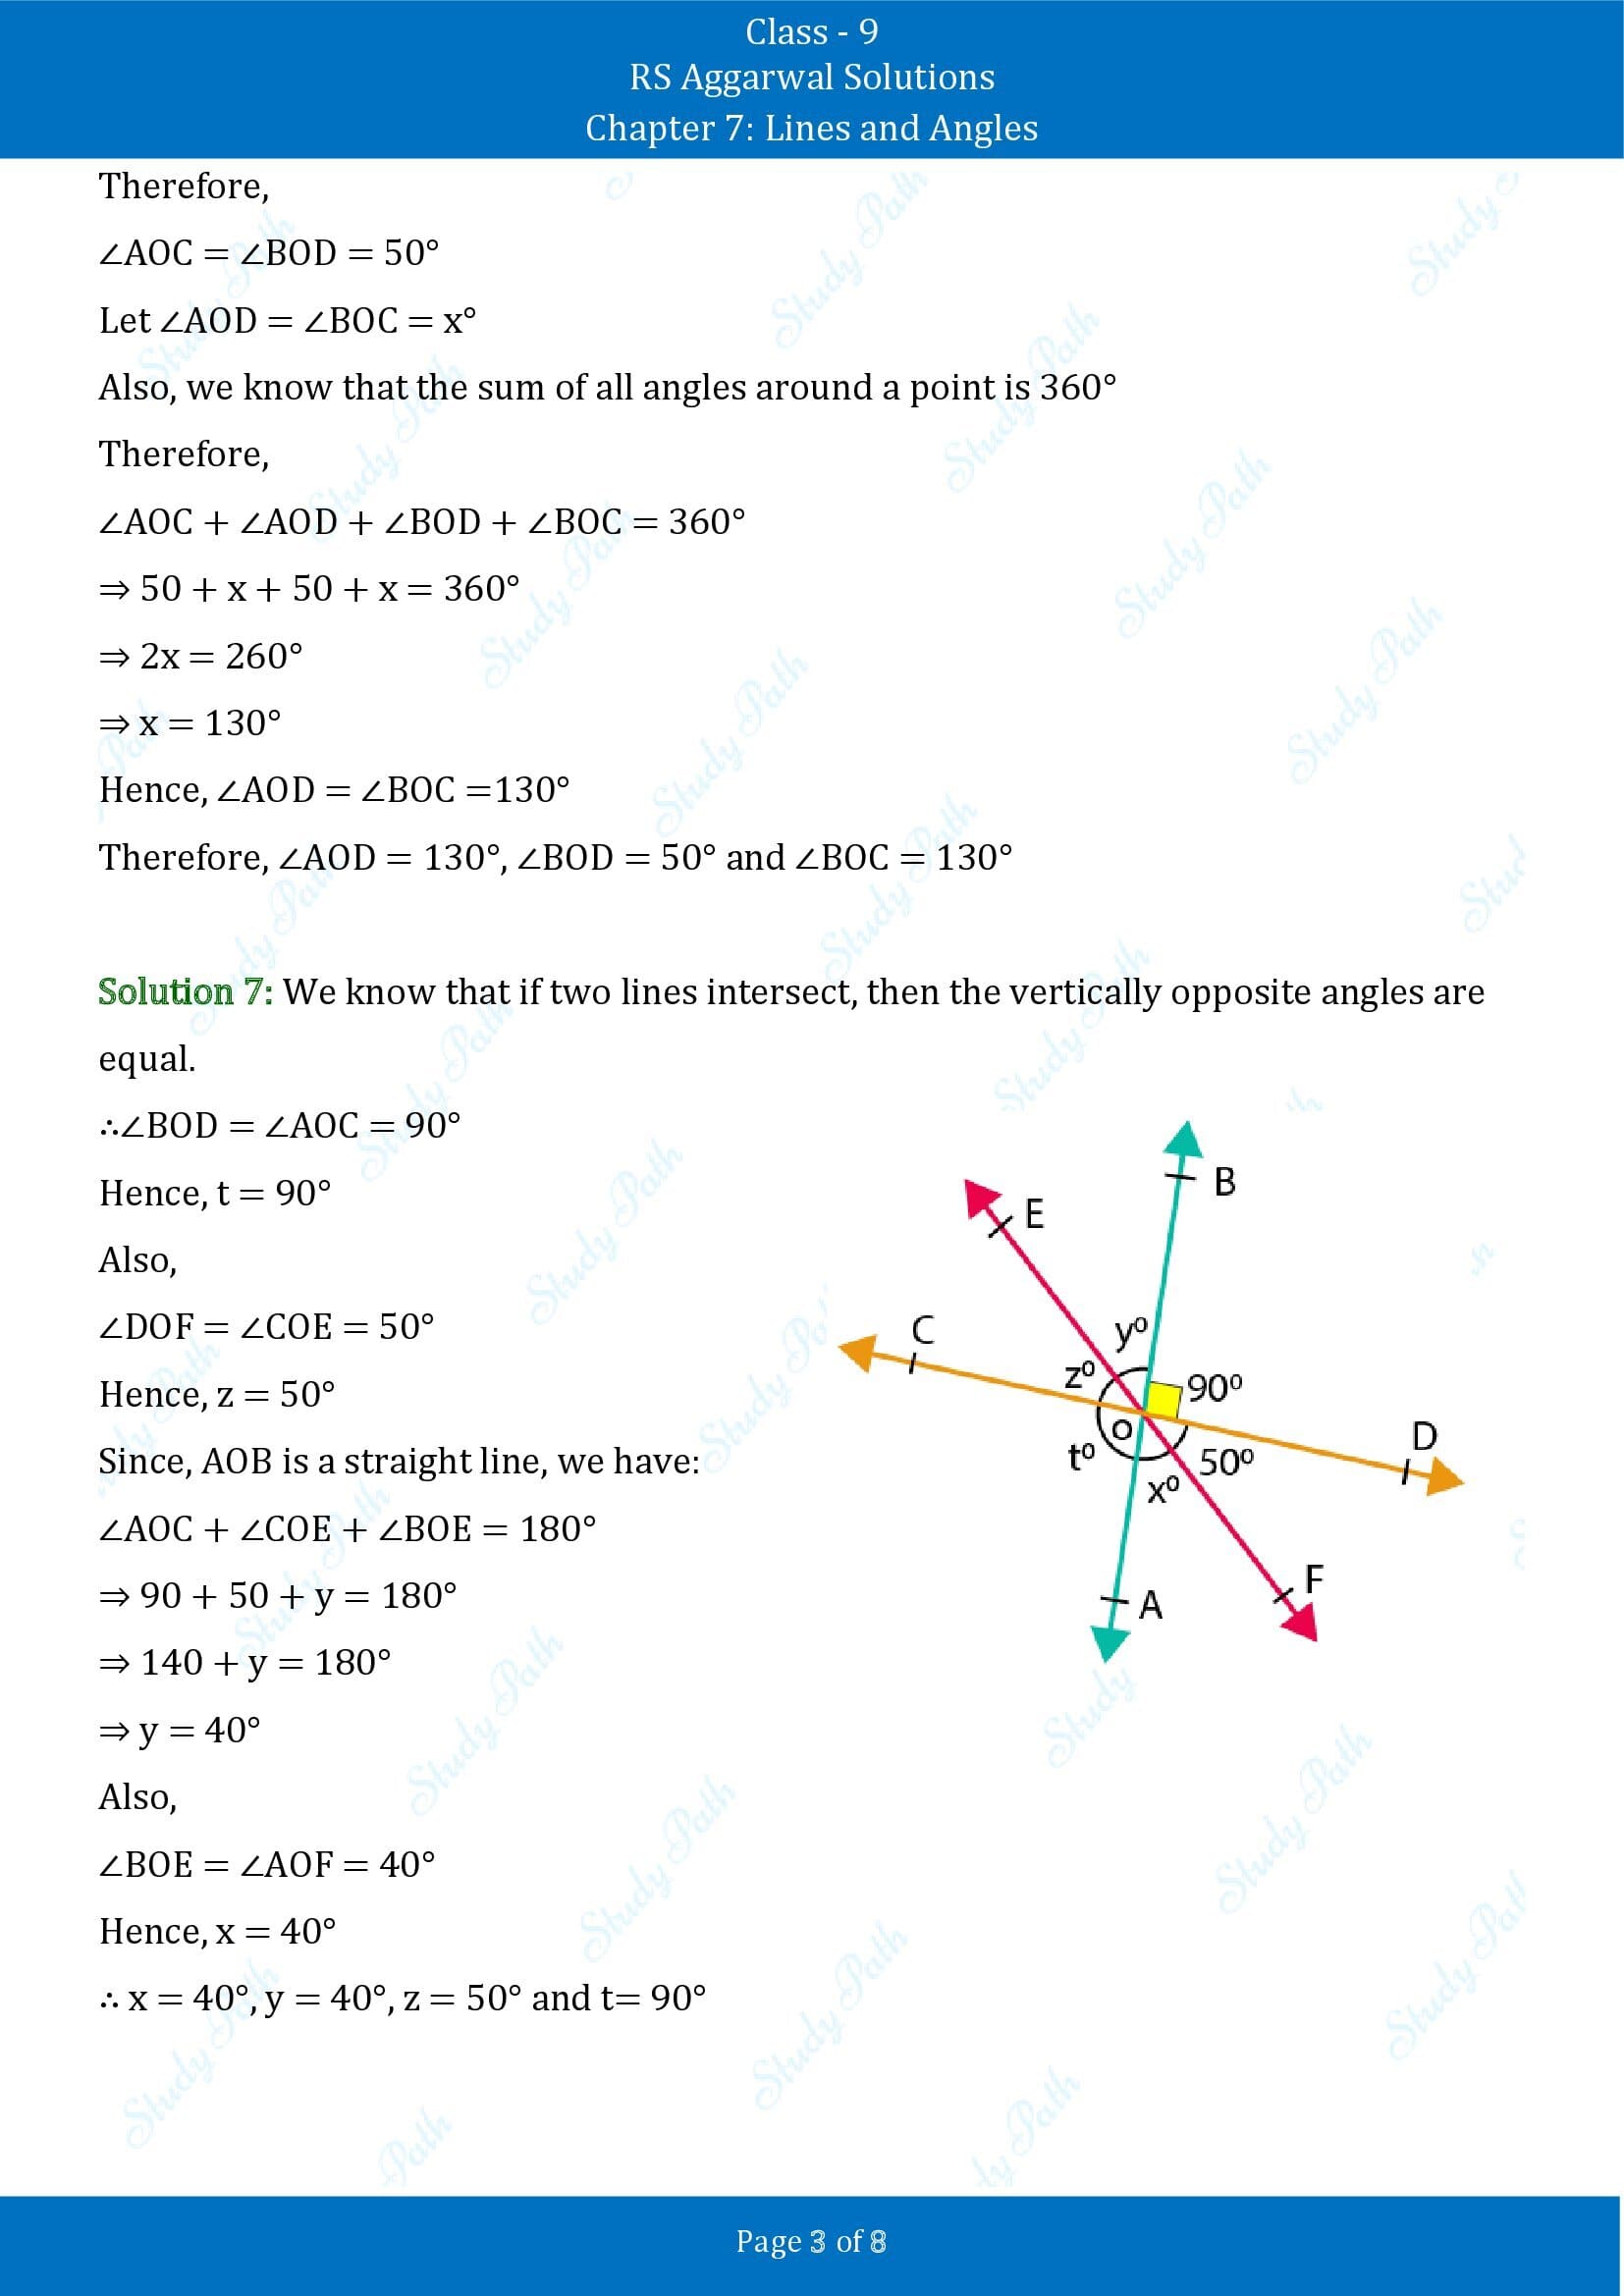 RS Aggarwal Solutions Class 9 Chapter 7 Lines and Angles Exercise 7B 00003